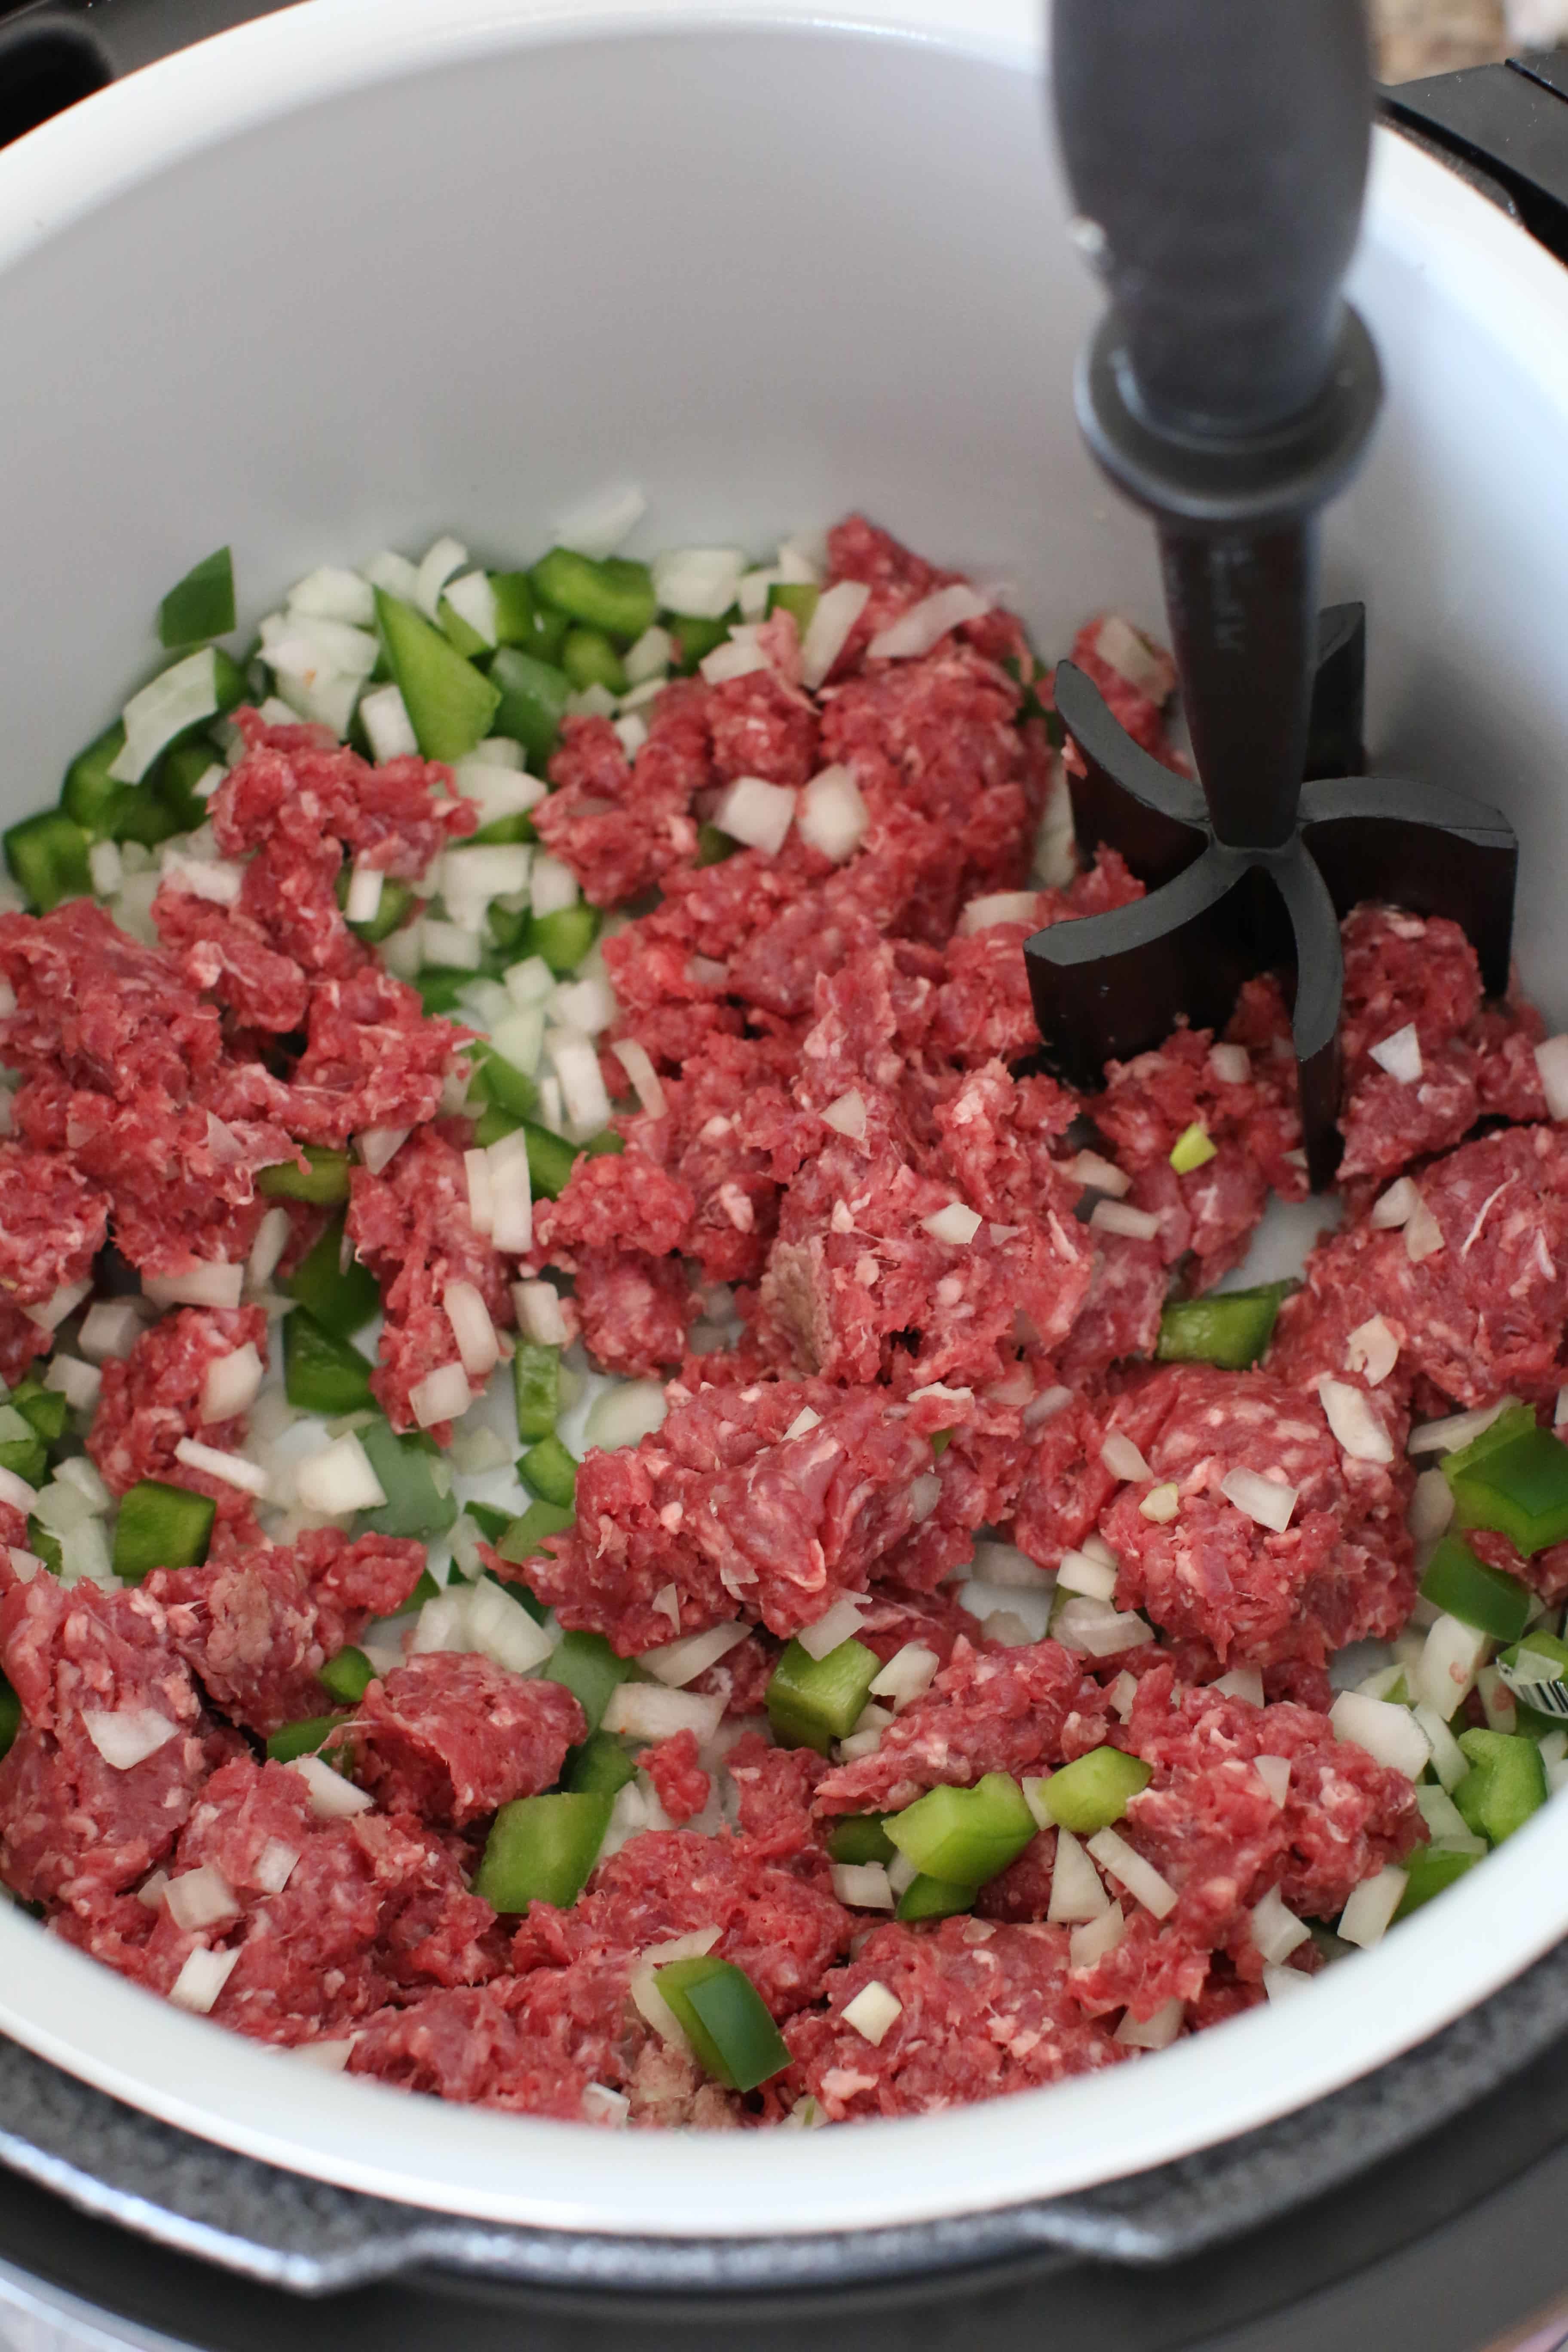 browning ground beef, onion, green pepper in an 8-quart pressure cooker.